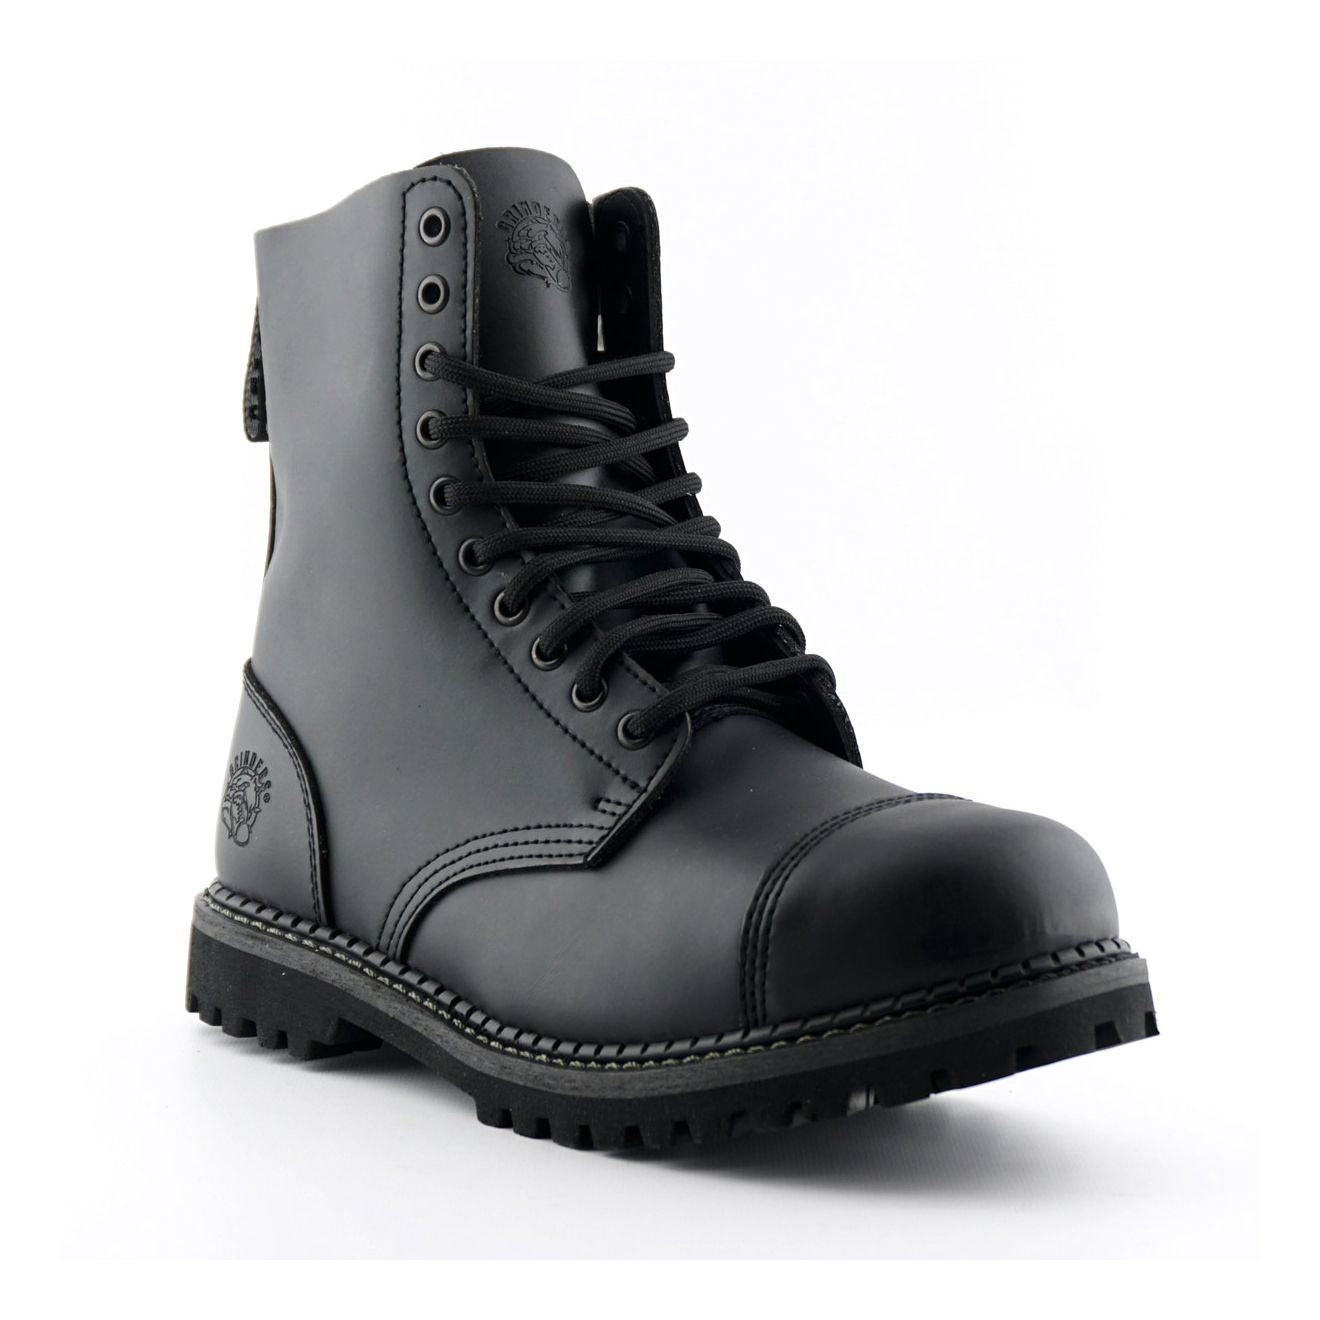 Grinders Stag CS Black Unisex Safety Steel Toe Cap Military Punk Boots